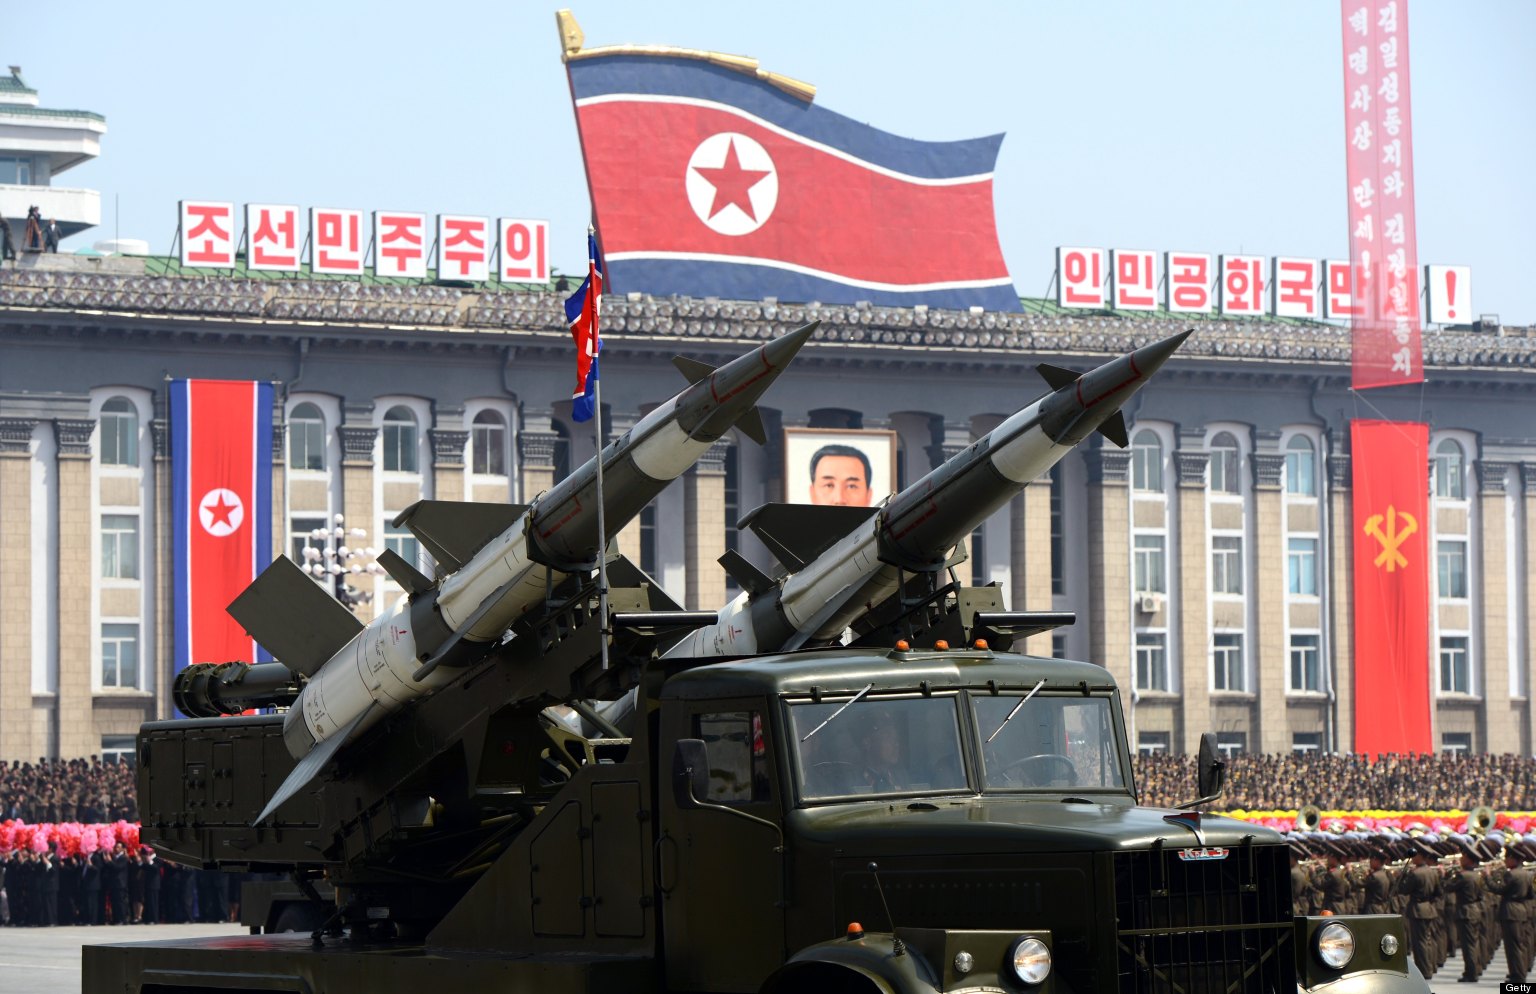 Missiles are displayed during a military